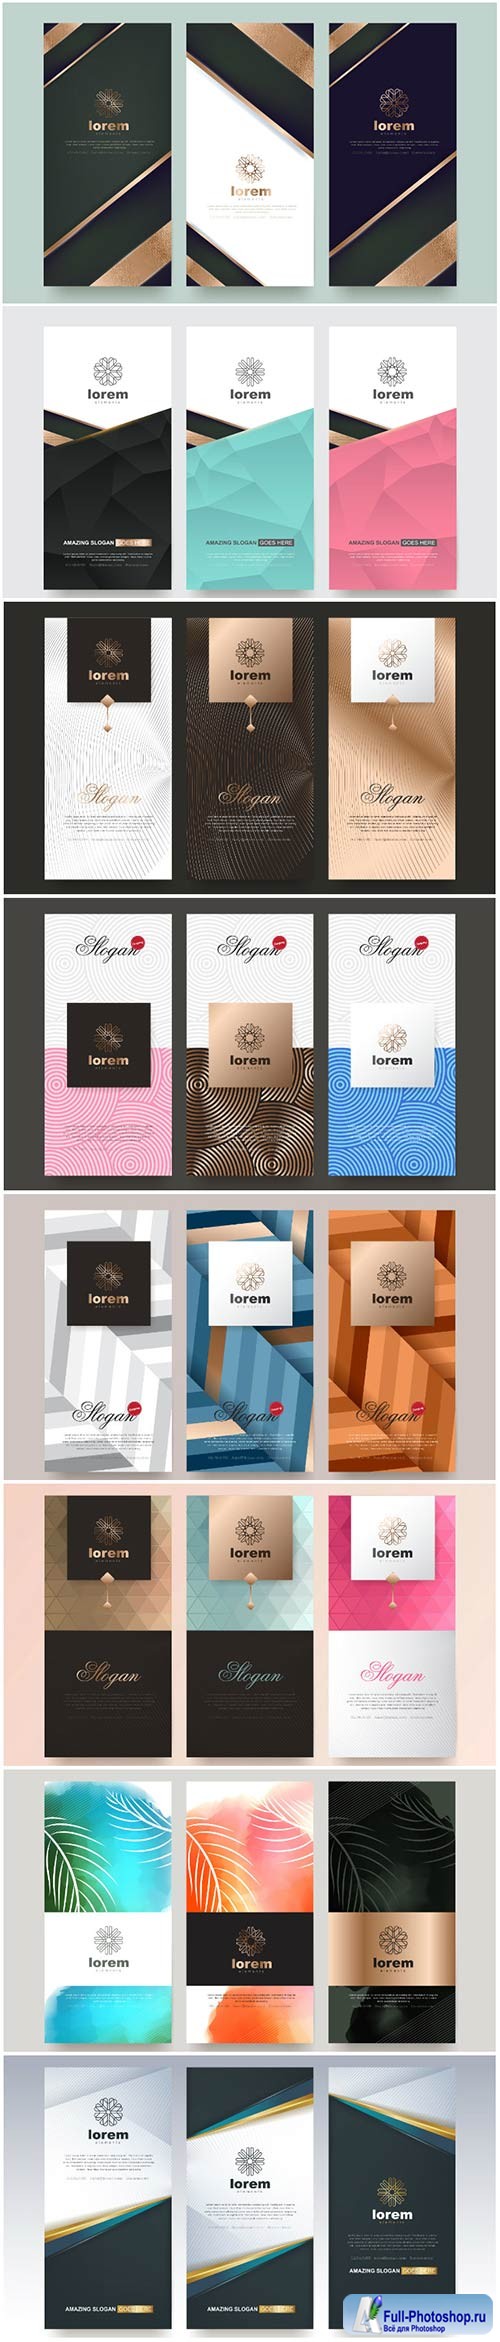 Stylish vector templates for packaging